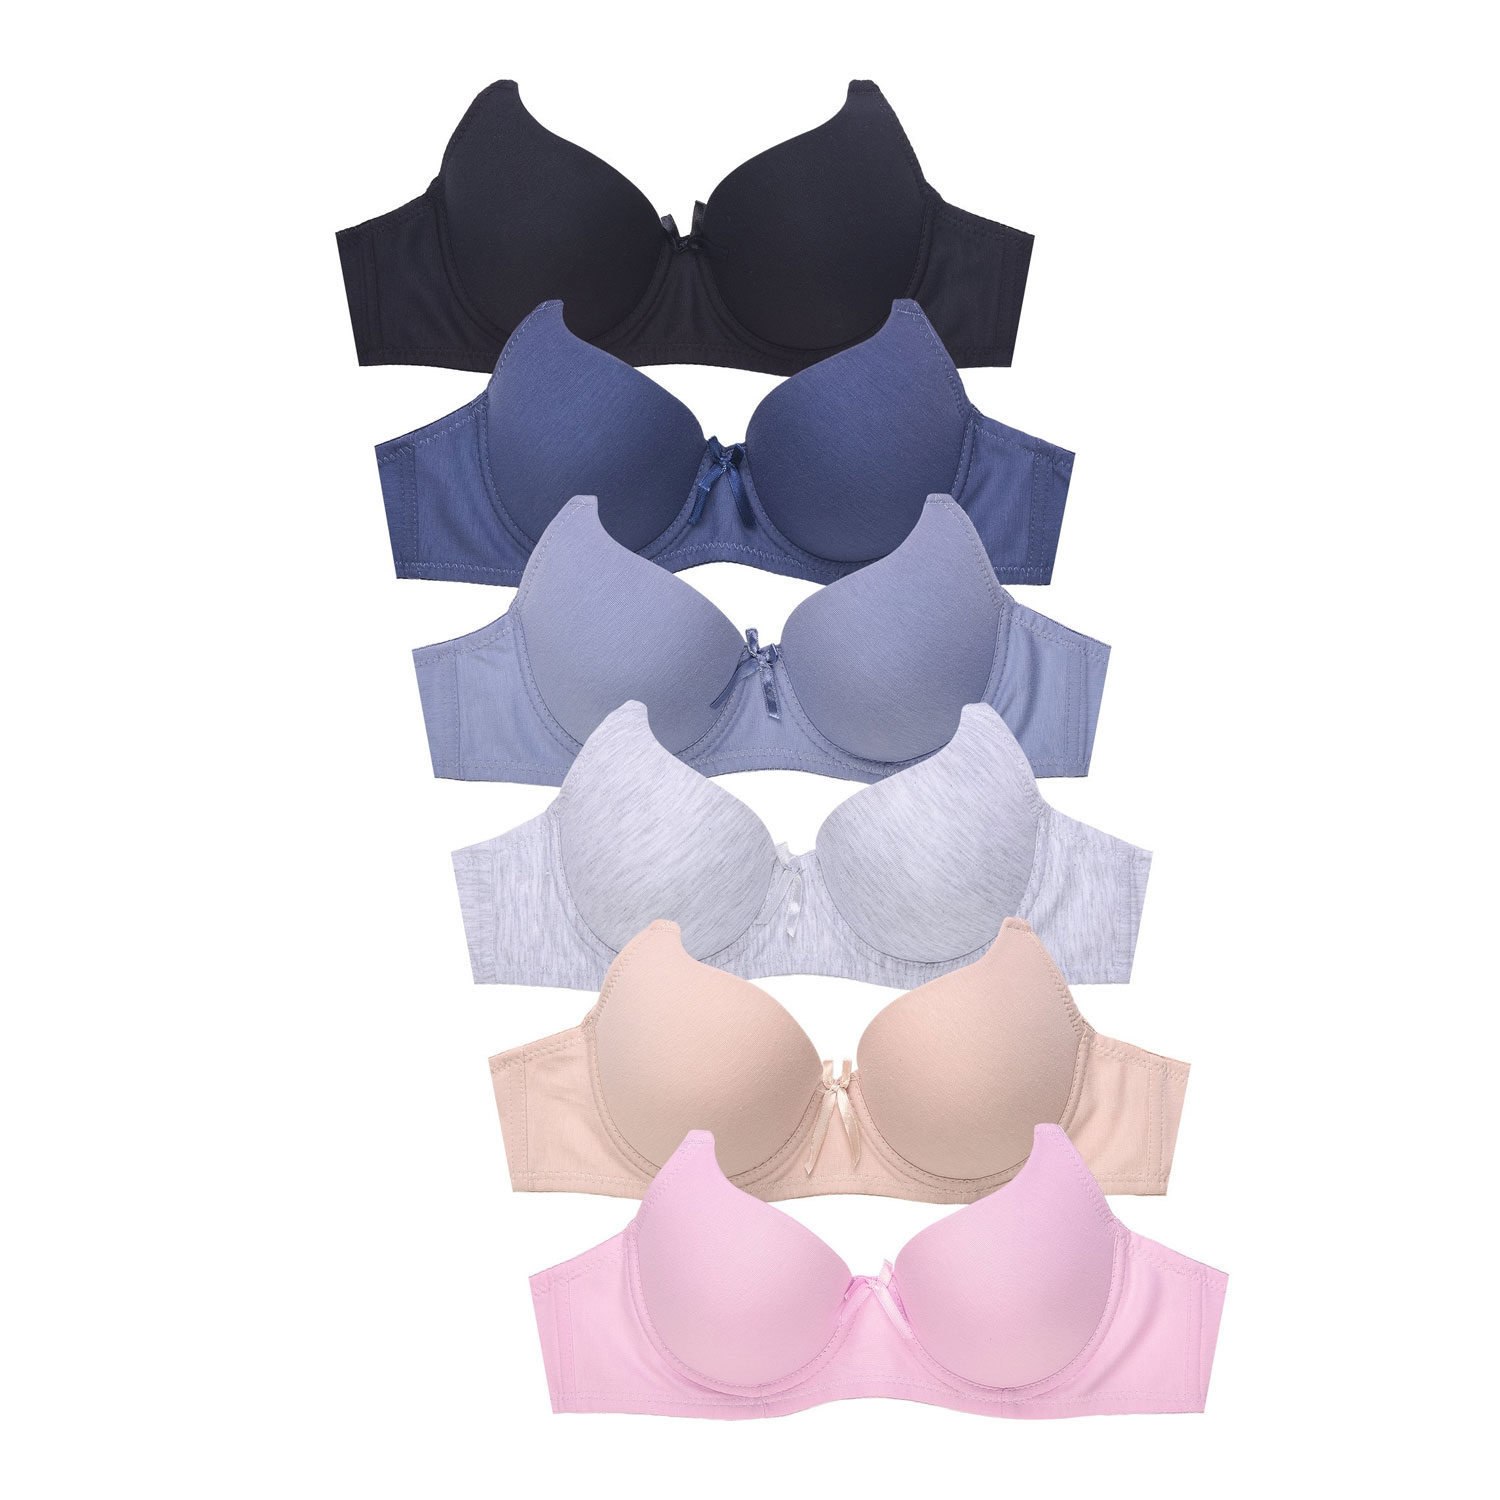 Sofra Ladies Full Cup Cotton Plain Bra Pack Of 6